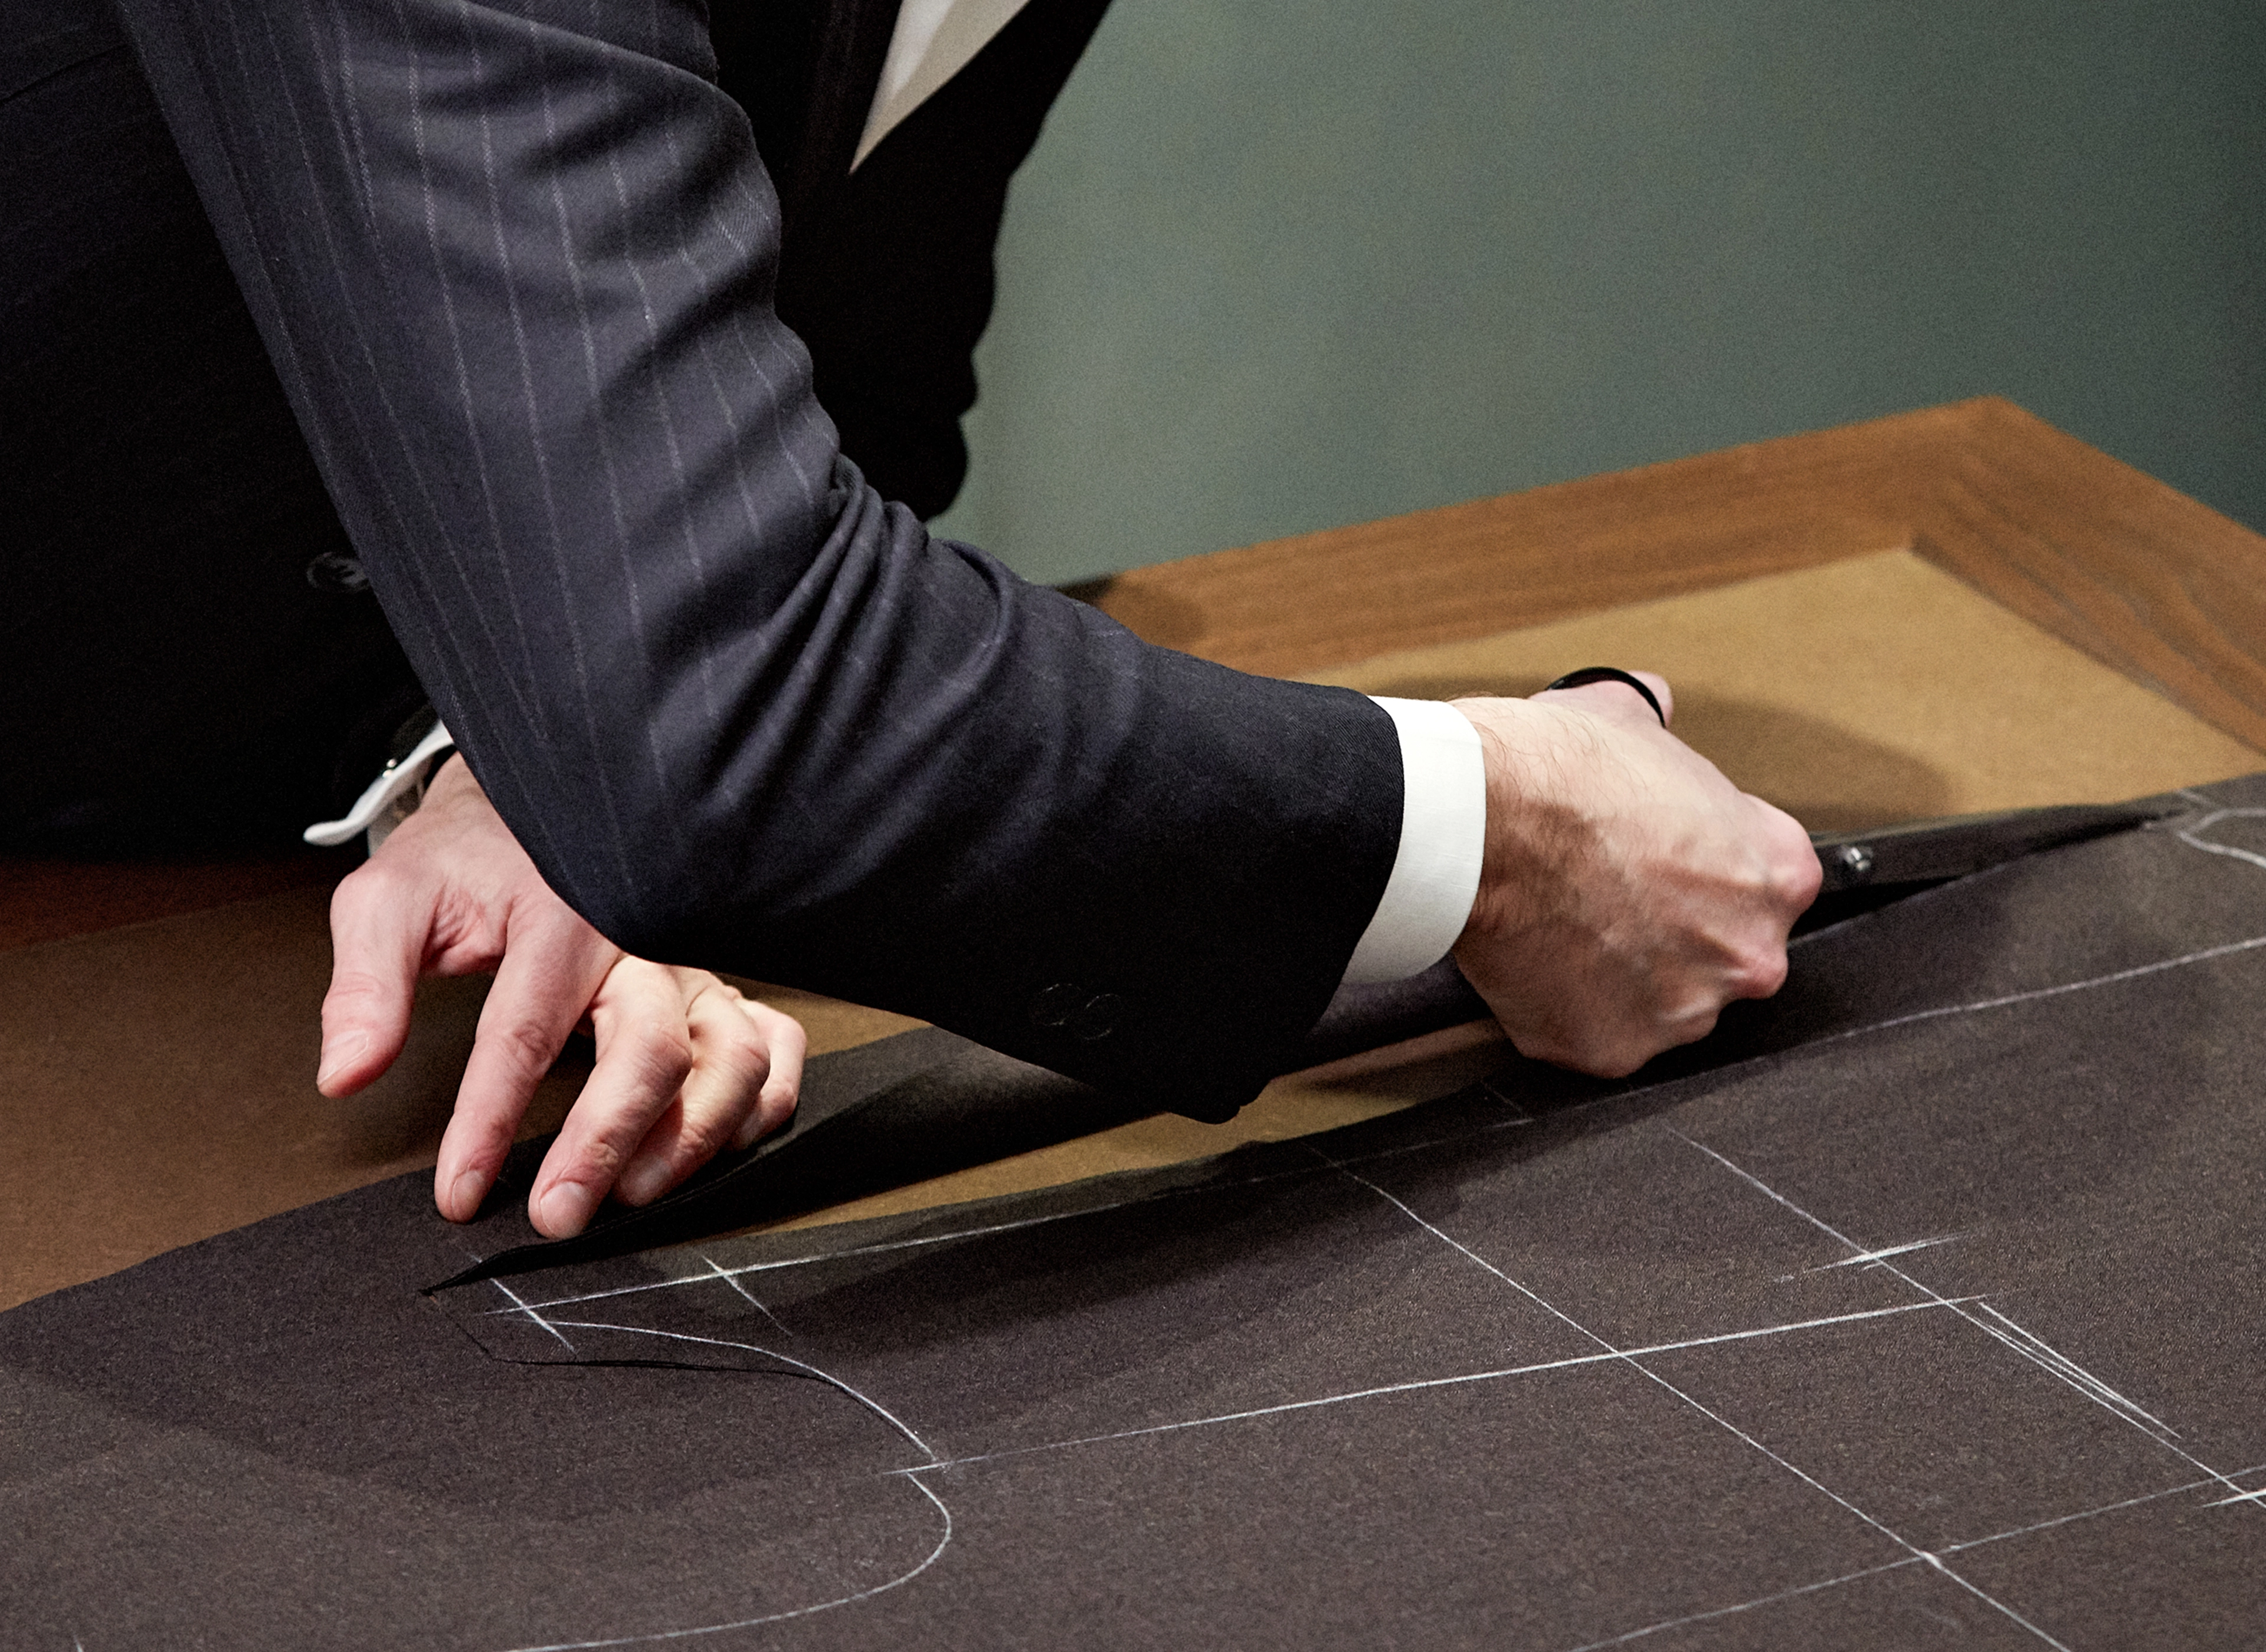 Top 3 Things to Look for in a Custom Suit Tailor — Bespoke Custom Suits  Hand Made in Los Angeles